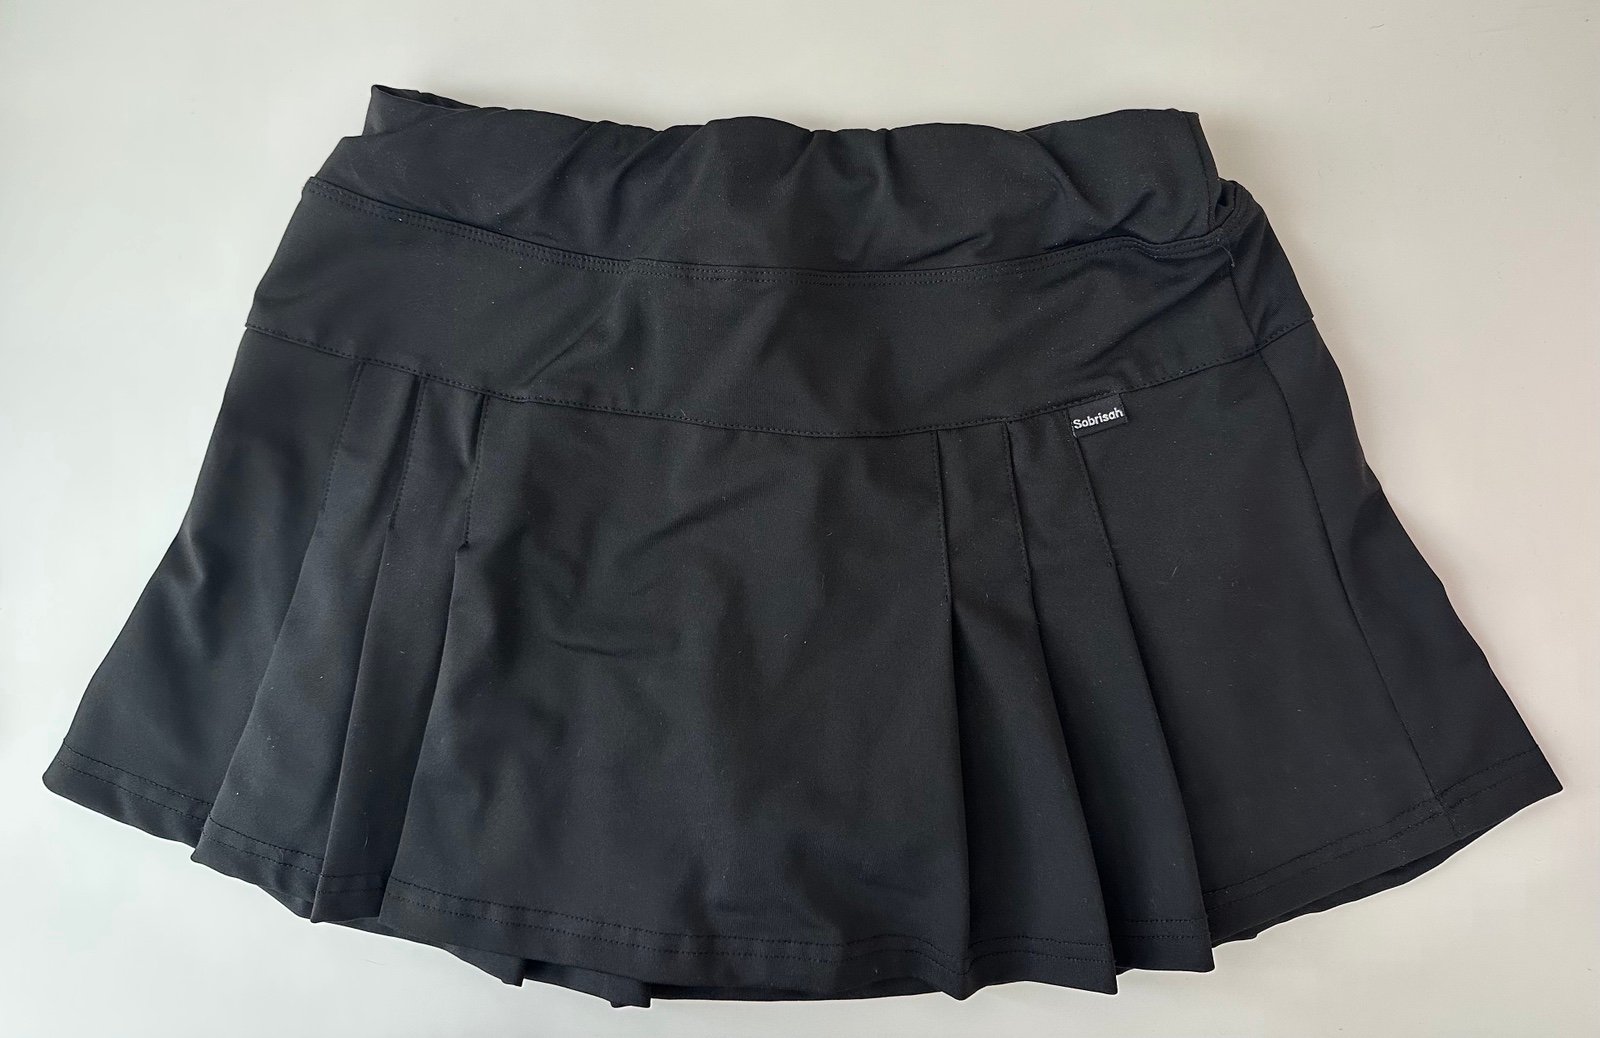 Affordable Women’s Tennis Skirt - Size XS m4OG9sXCP Cou